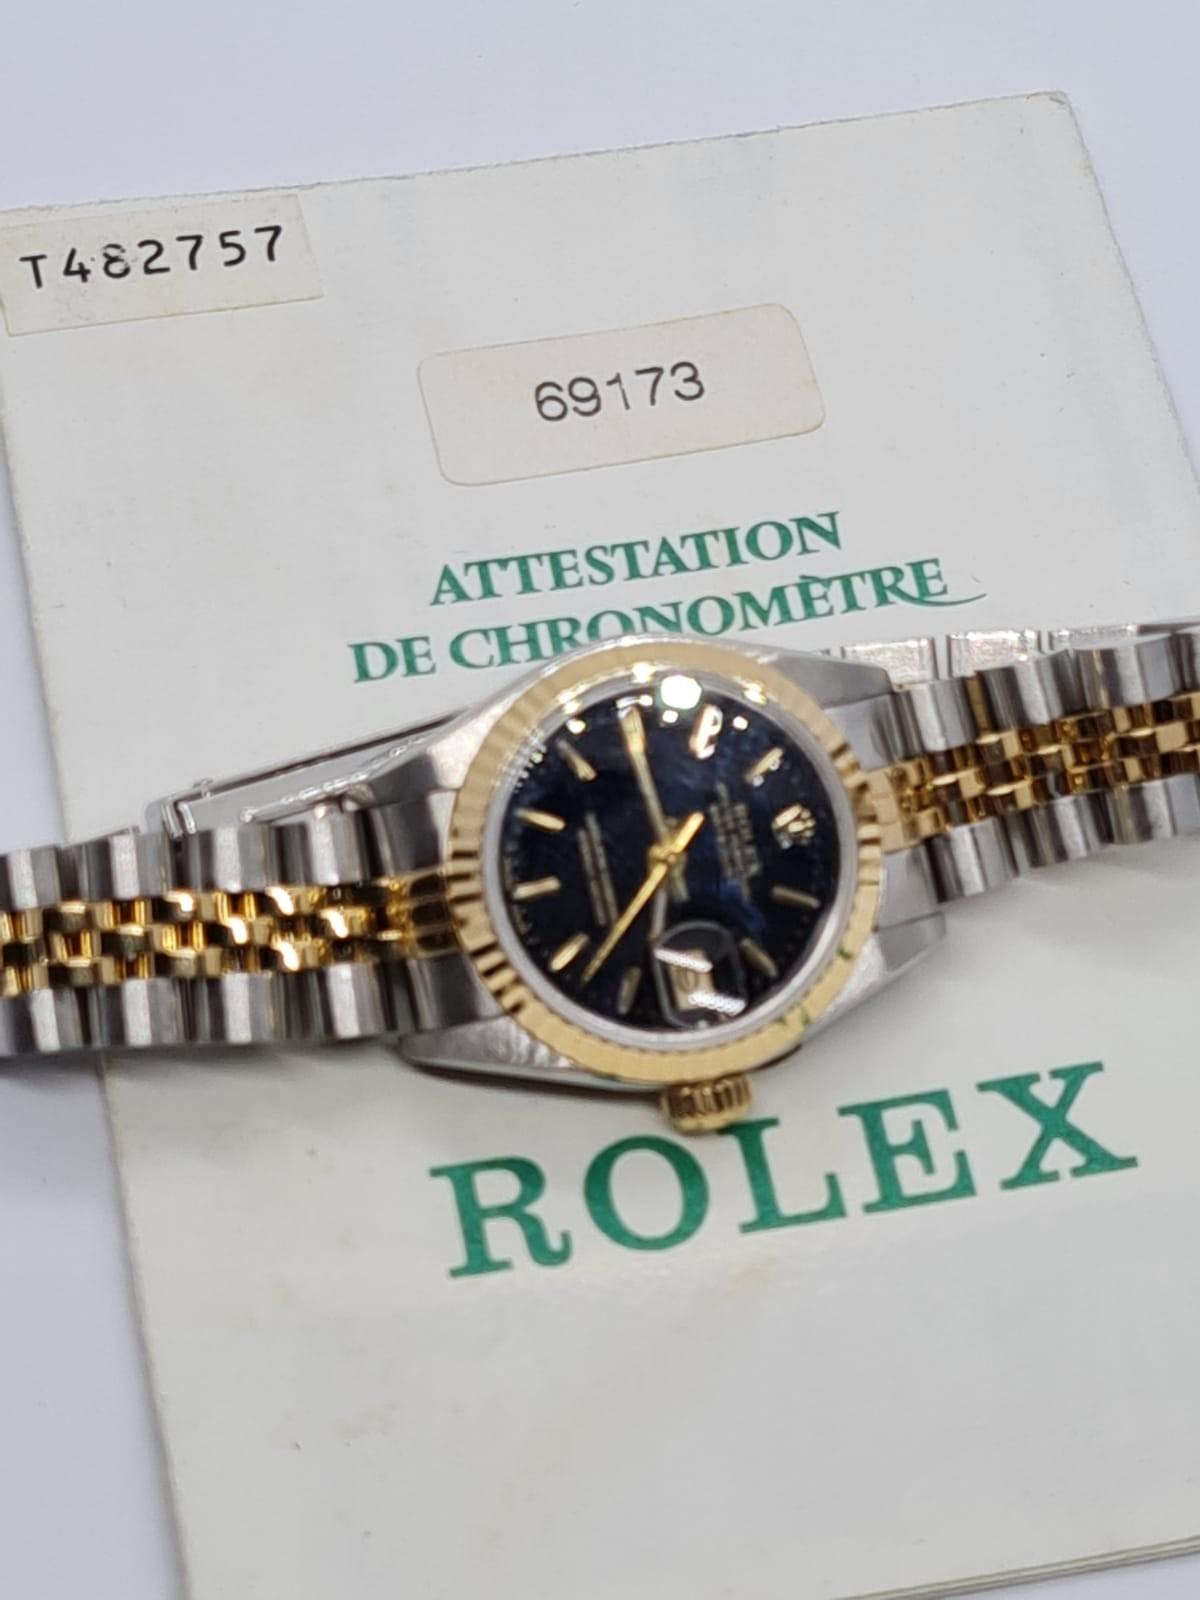 ROLEX Oyster Perpetual Datejust ladies watch with black face and two tone steel strap, 22mm case - Image 18 of 19